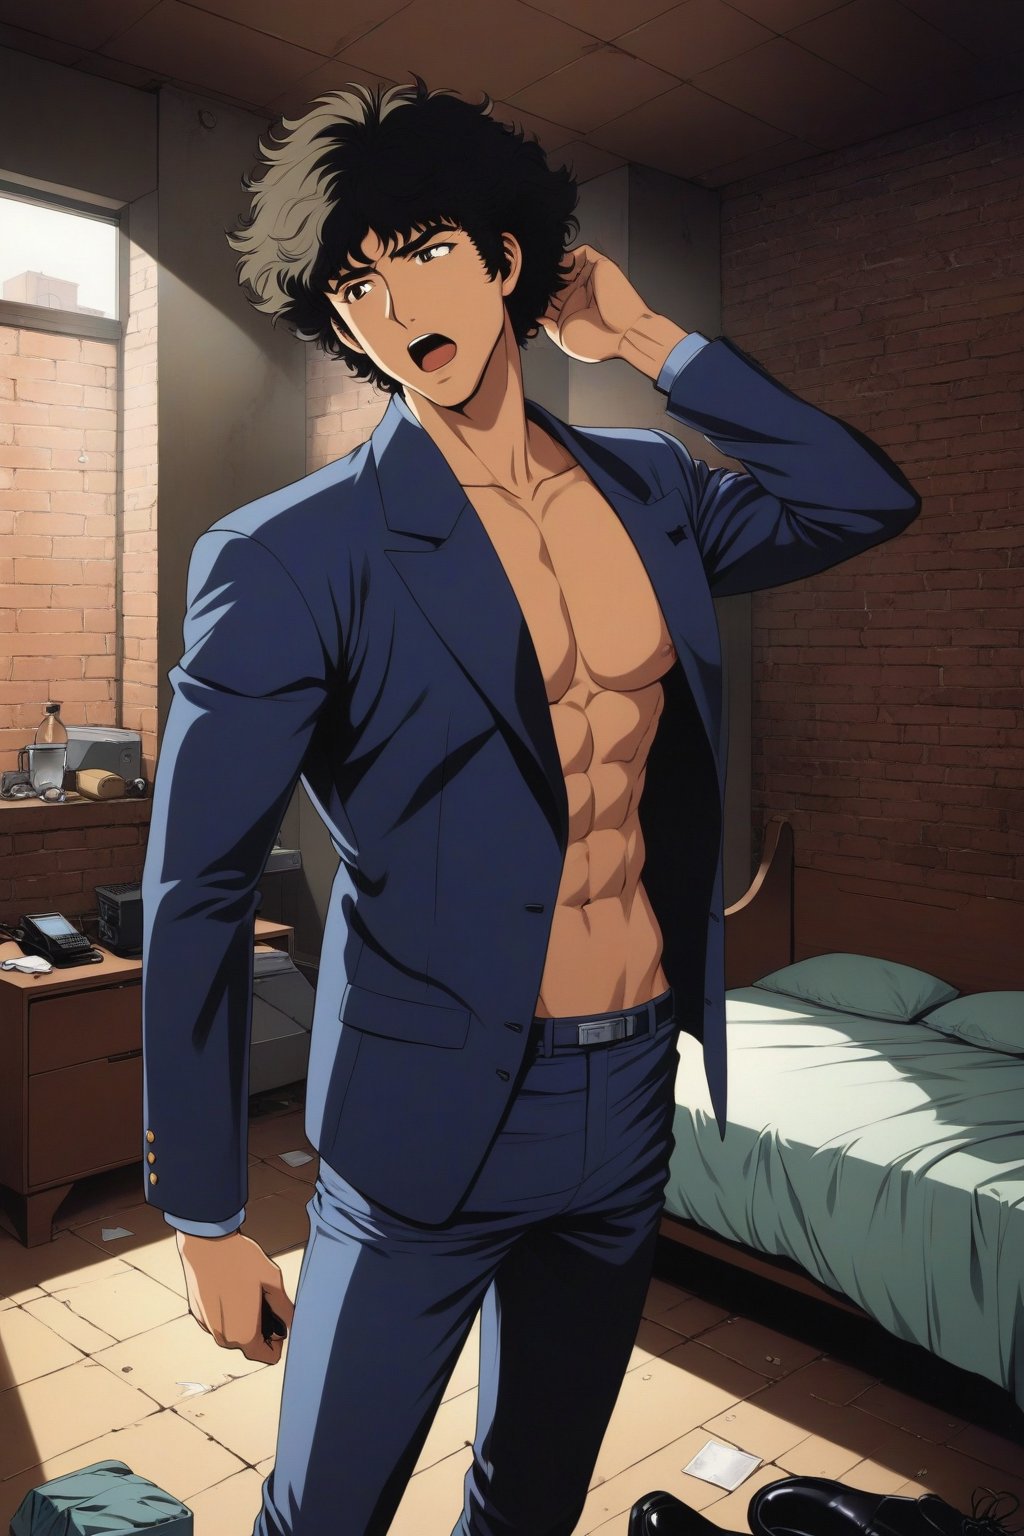 (masterpiece, best quality, ultra HD anime quality, super high resolution, 1980s/(style), retro, anatomically accurate, perfect anatomy), (side view, bottom angle), looking at the camera, (Spike Spiegel, one boy), solo, (black hair, short hair, bangs, messy hair, brown eyes, sleepy face), one eye closed, (mouth slightly open, wide), (hot chest, impressive abs, six pack), (navy suit pants, black socks, black leather shoes), holding a gun, (standing, yawning, one hand on head, beside bed), (brick room view, bedroom, bed, dirty room, trash scattered around), score_9, score_8_up, score_7_up, score_6_up,